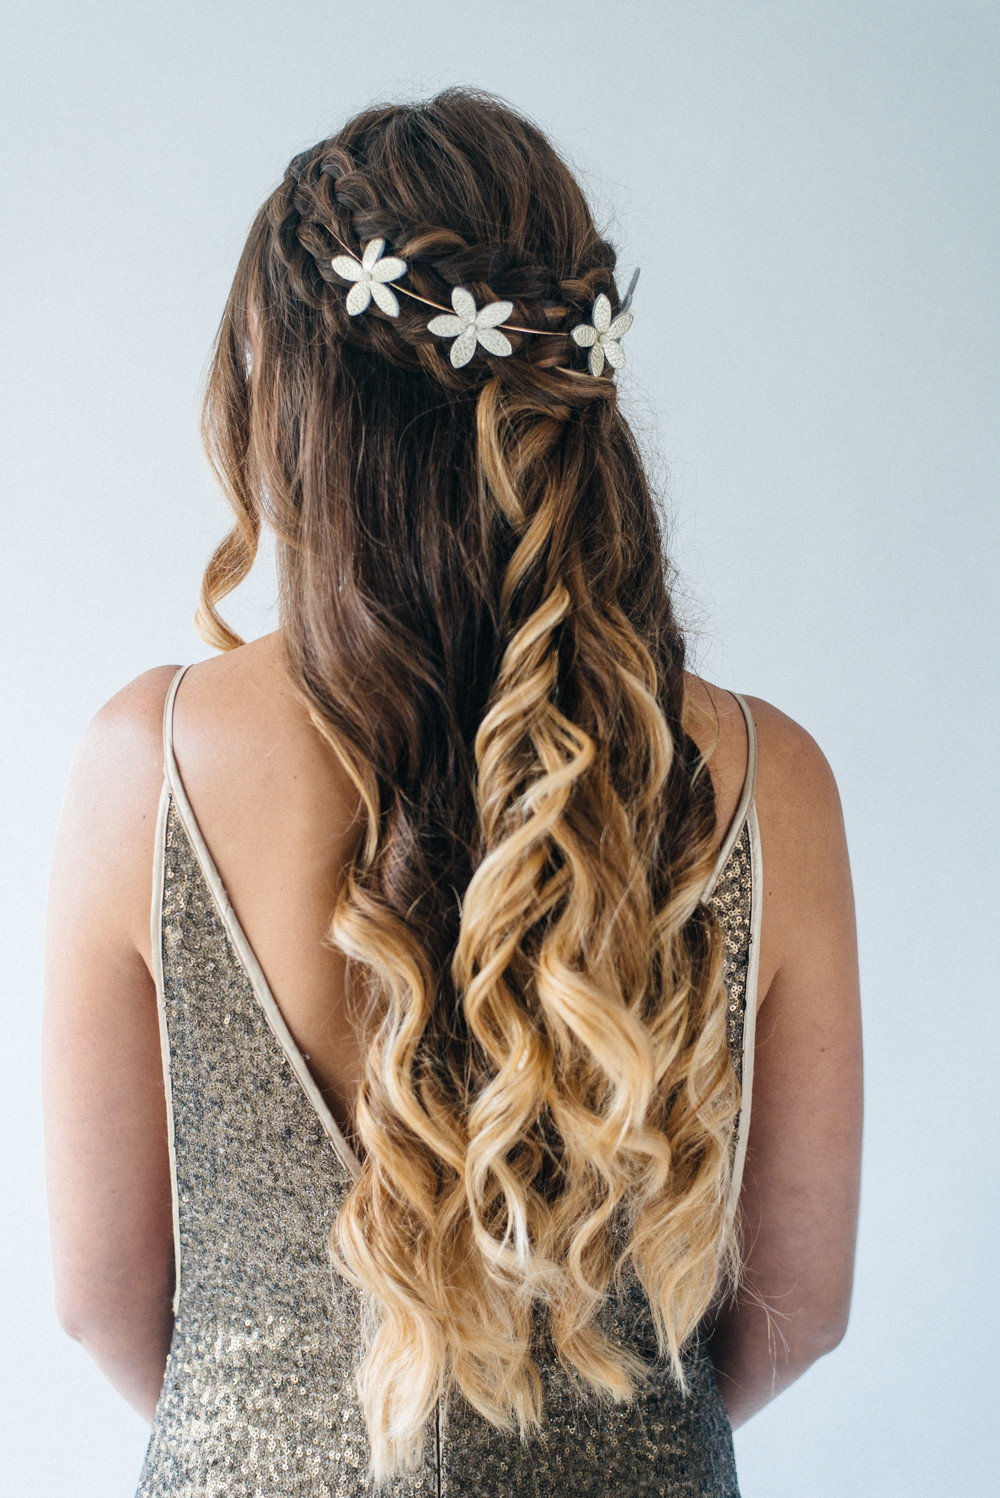 Hairstyles For Your Wedding Day
 Inspiration For Half Up Half Down Wedding Hair With